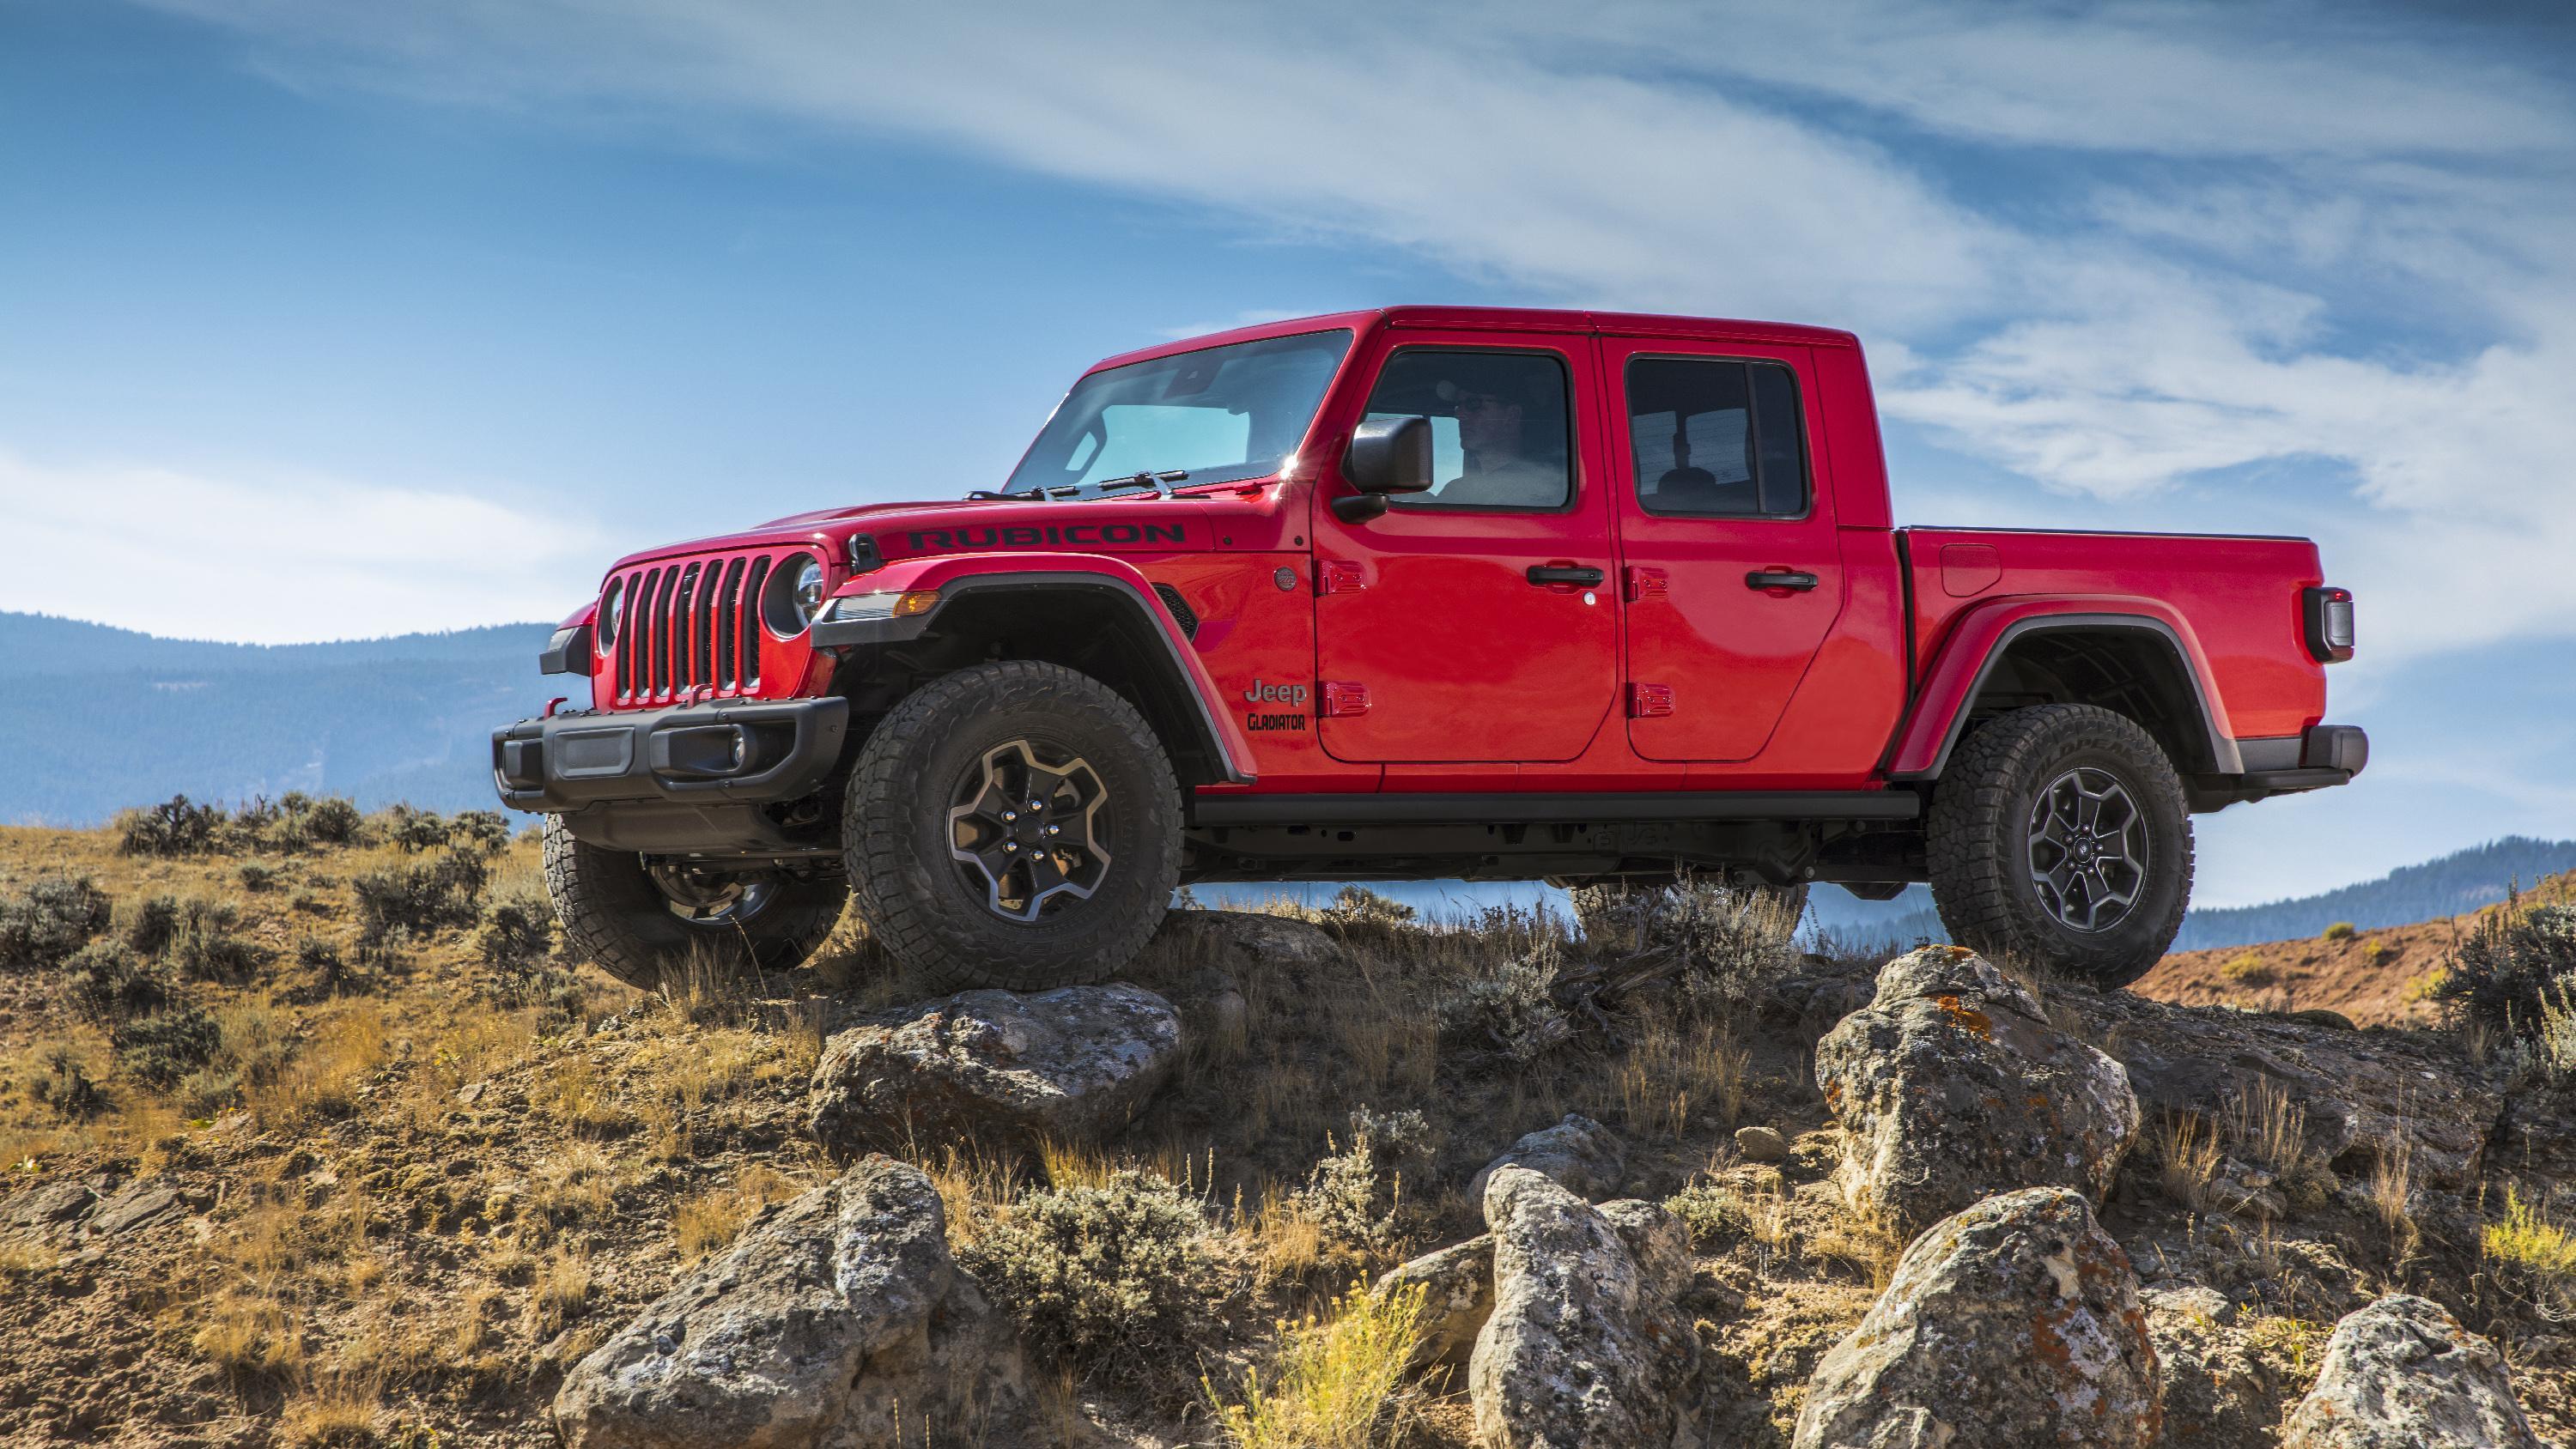  Jeep  Rubicon  Gladiator Wallpapers  Wallpaper  Cave